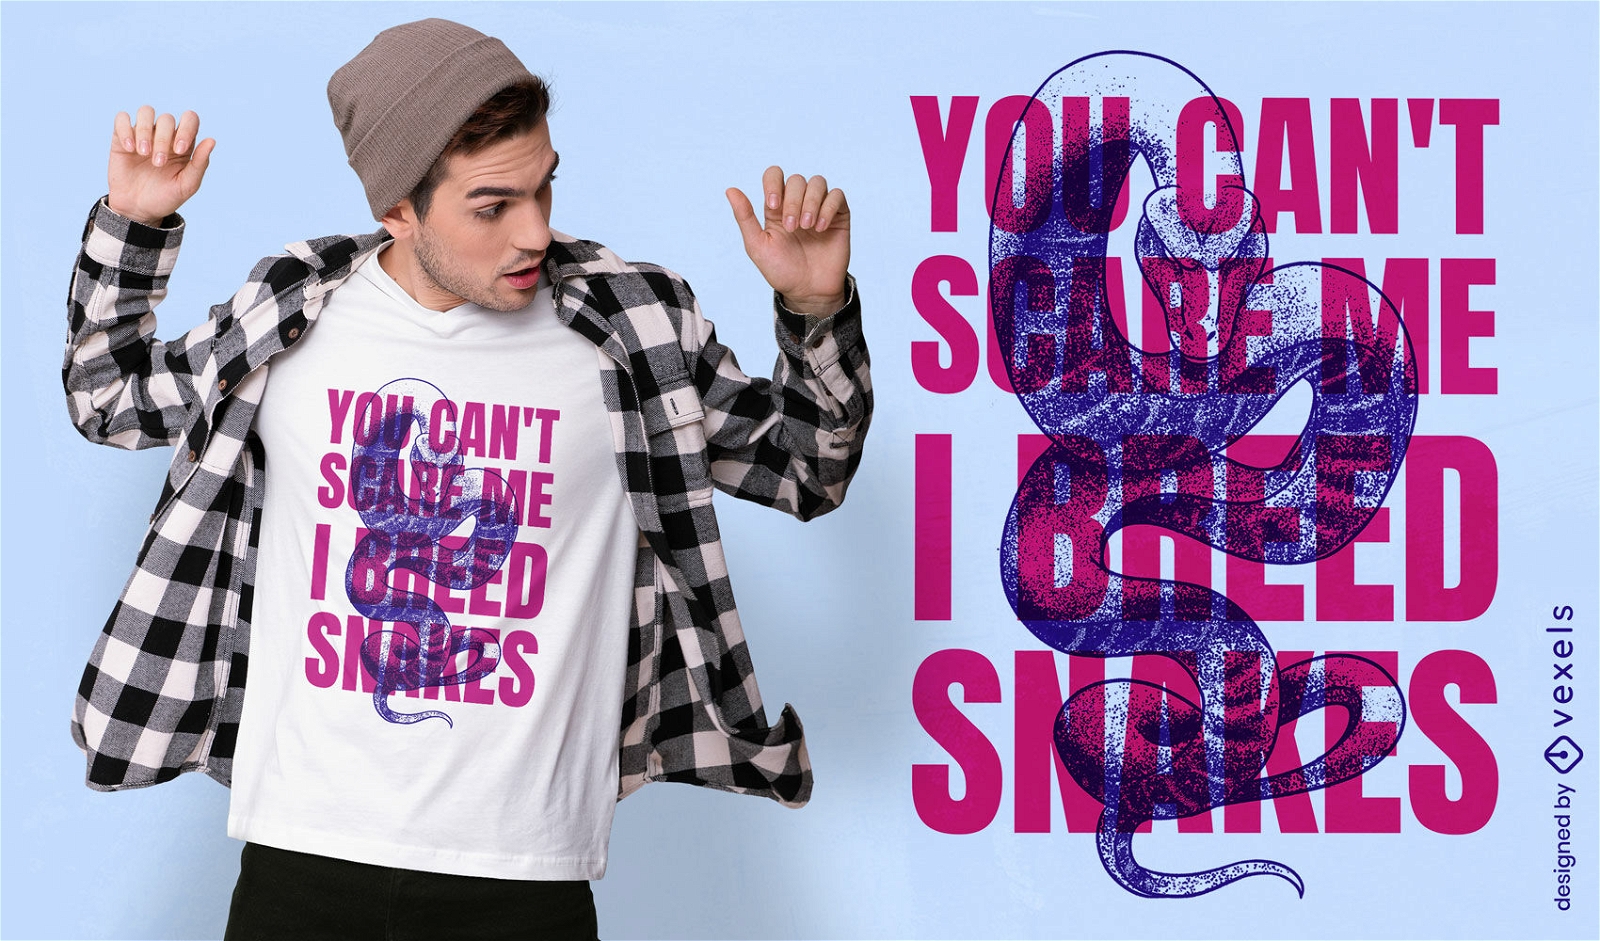 Breed snakes animal quote t-shirt design